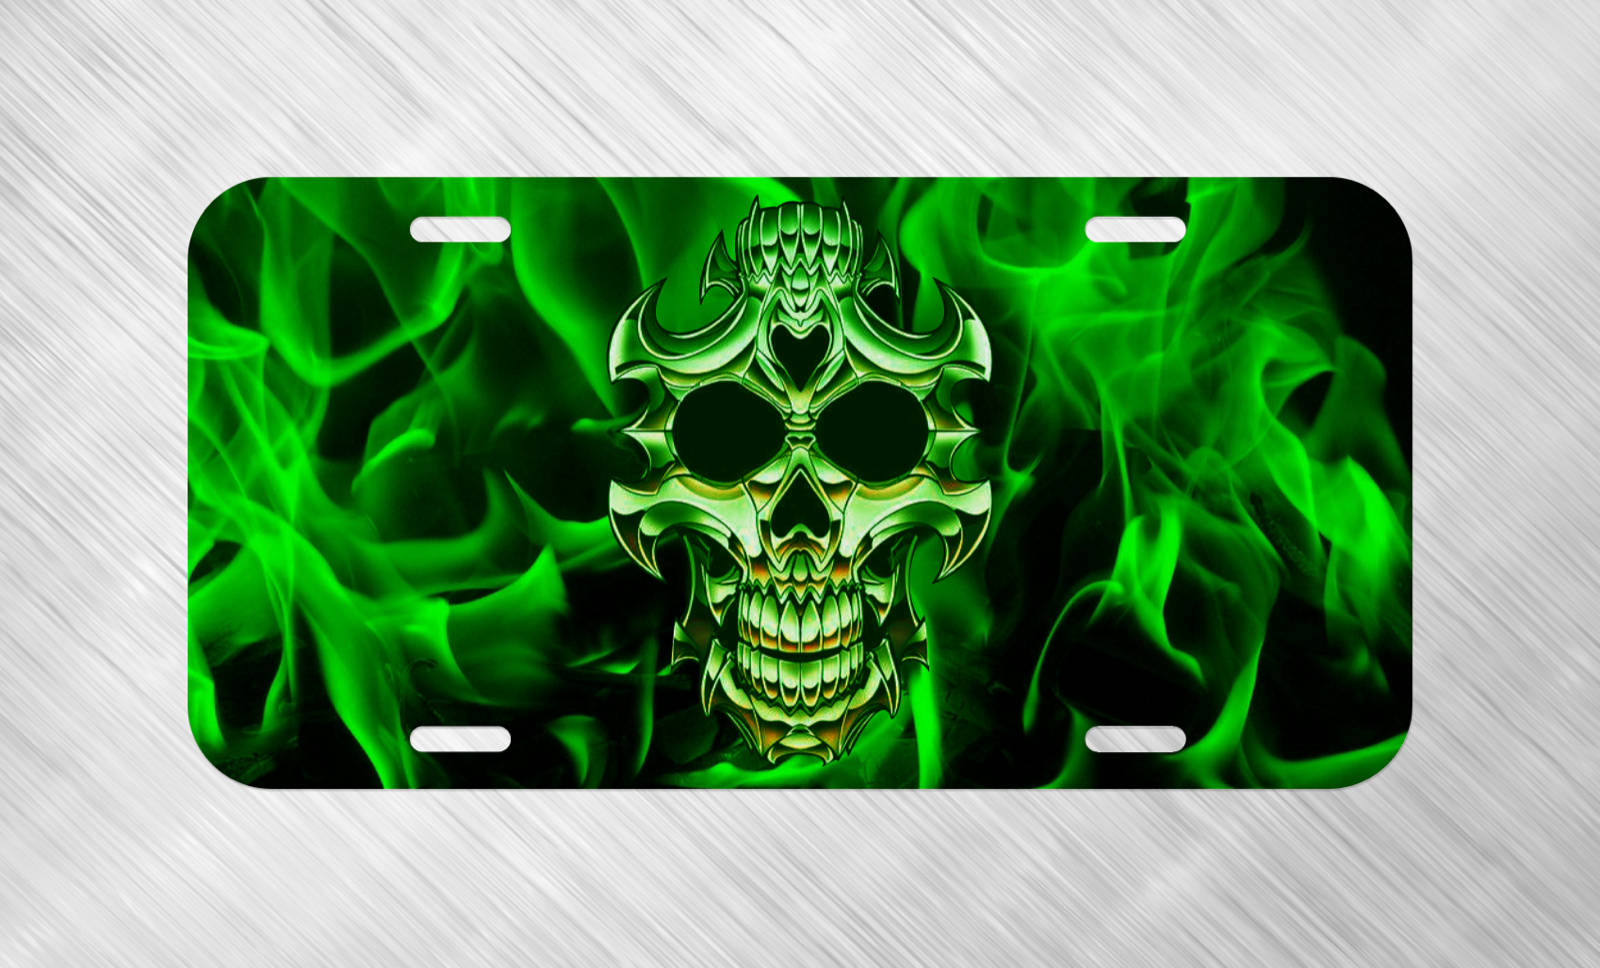 A Green Skull With Flames On A Black Background Wallpaper